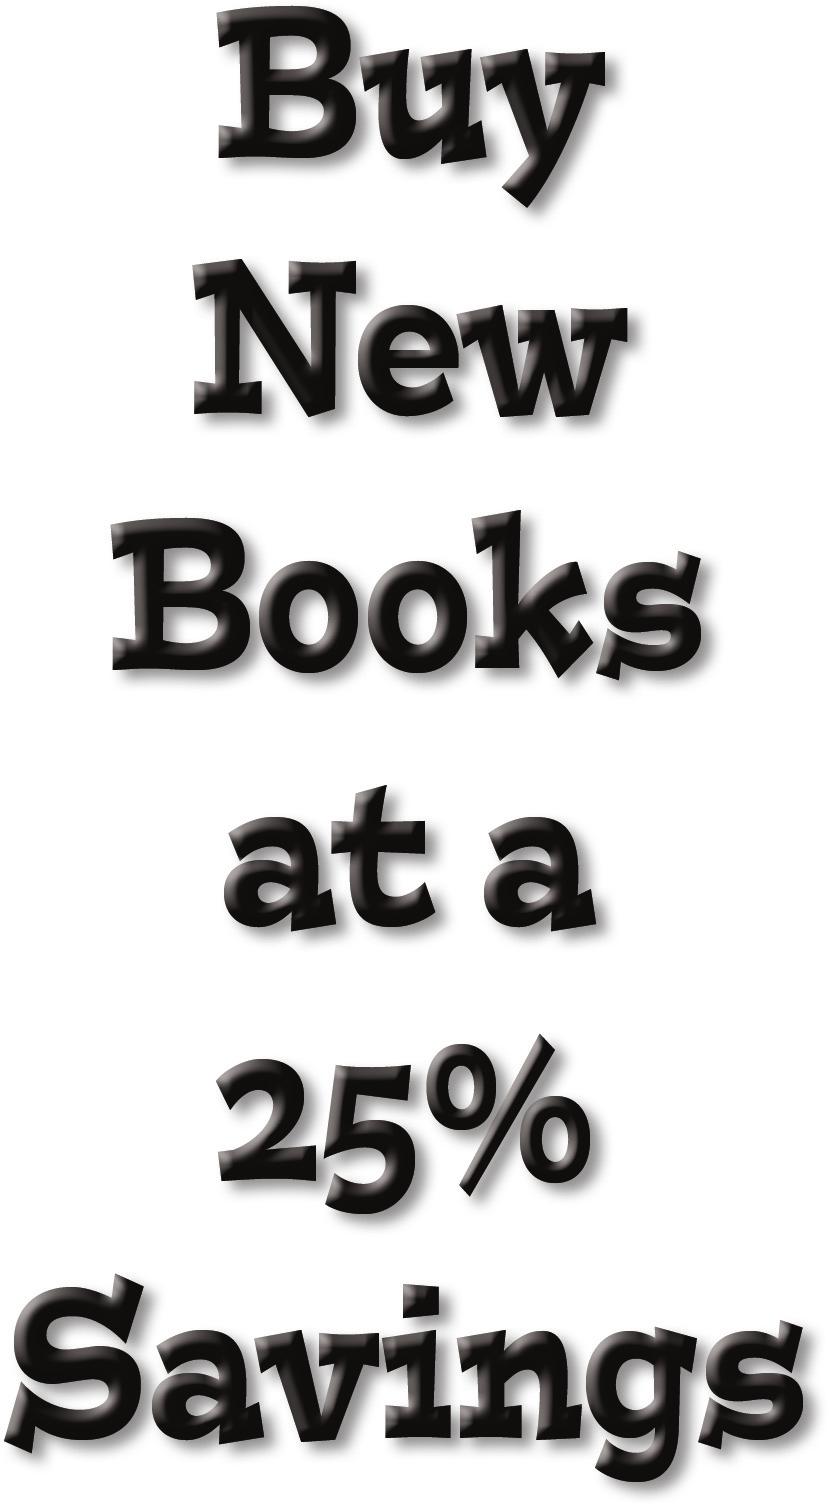 PEARSON Special Offer For a Limited time only Fill in your student textbook needs with brand-new books at a 25% savings. And, receive FREE teacher materials, if quantities exist.